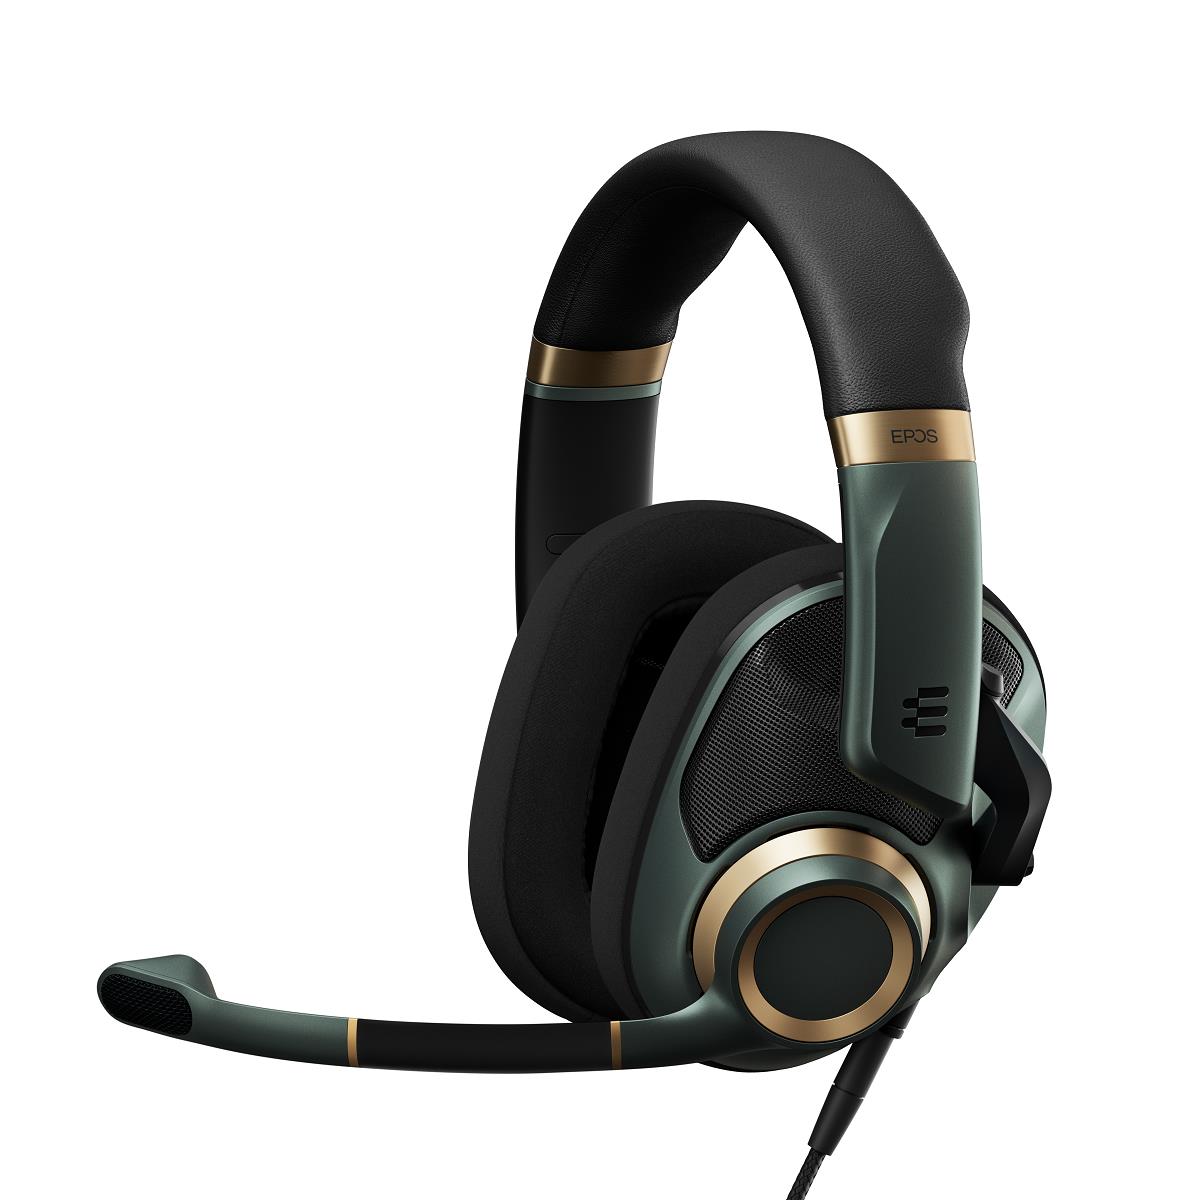 EPOS Audio H6PRO Open Acoustic Gaming Headset (Racing Green) - image 1 of 8